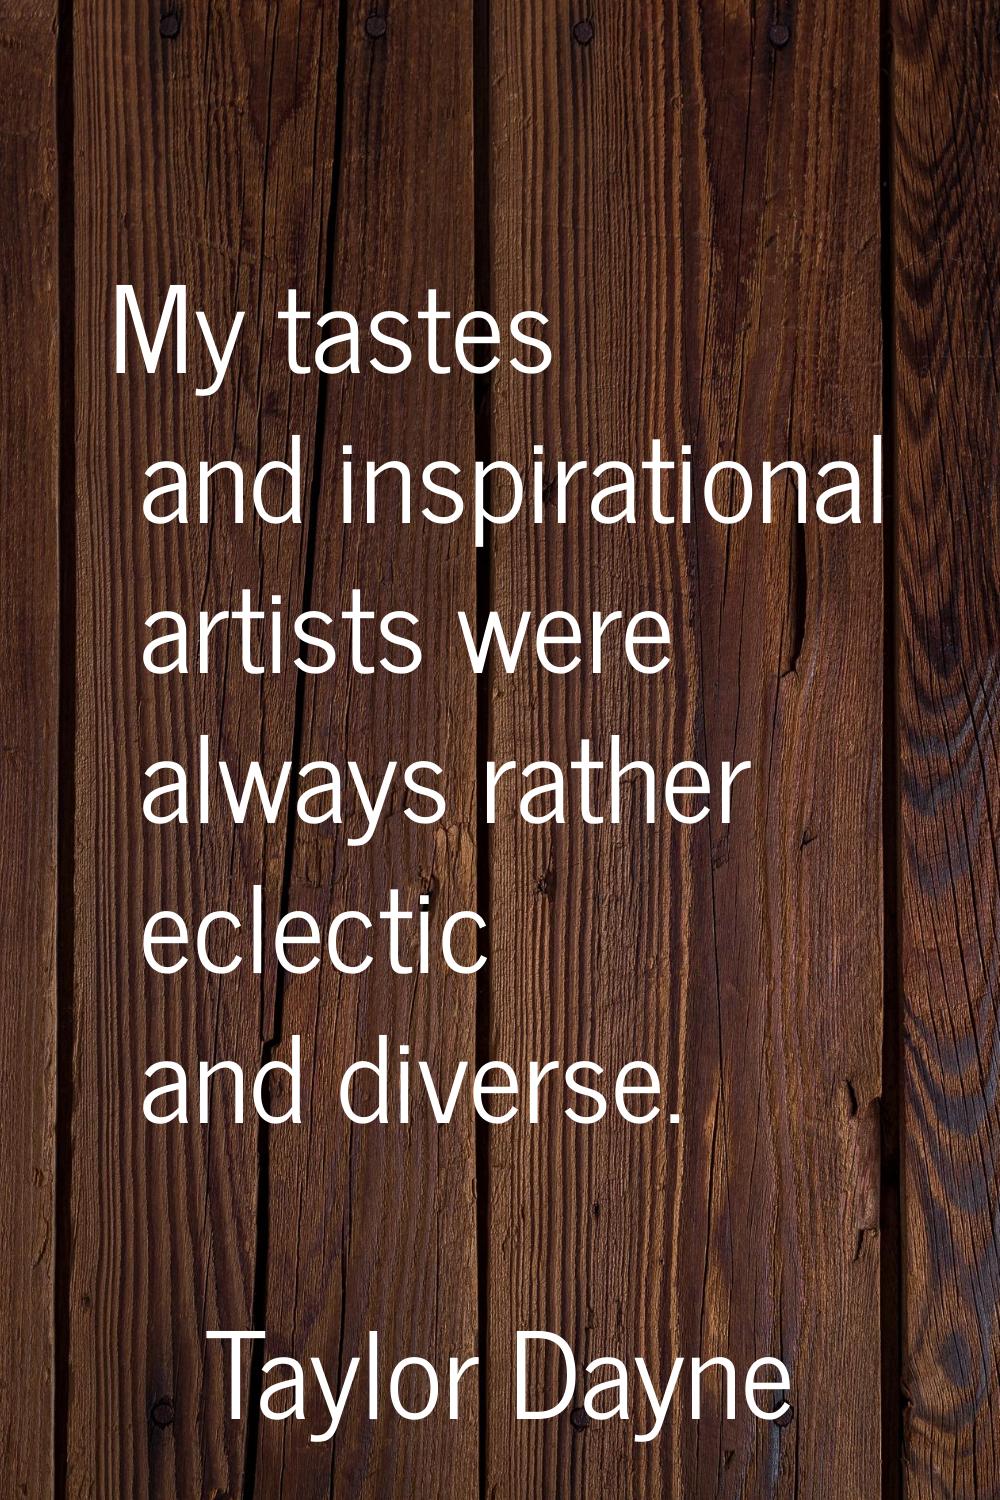 My tastes and inspirational artists were always rather eclectic and diverse.